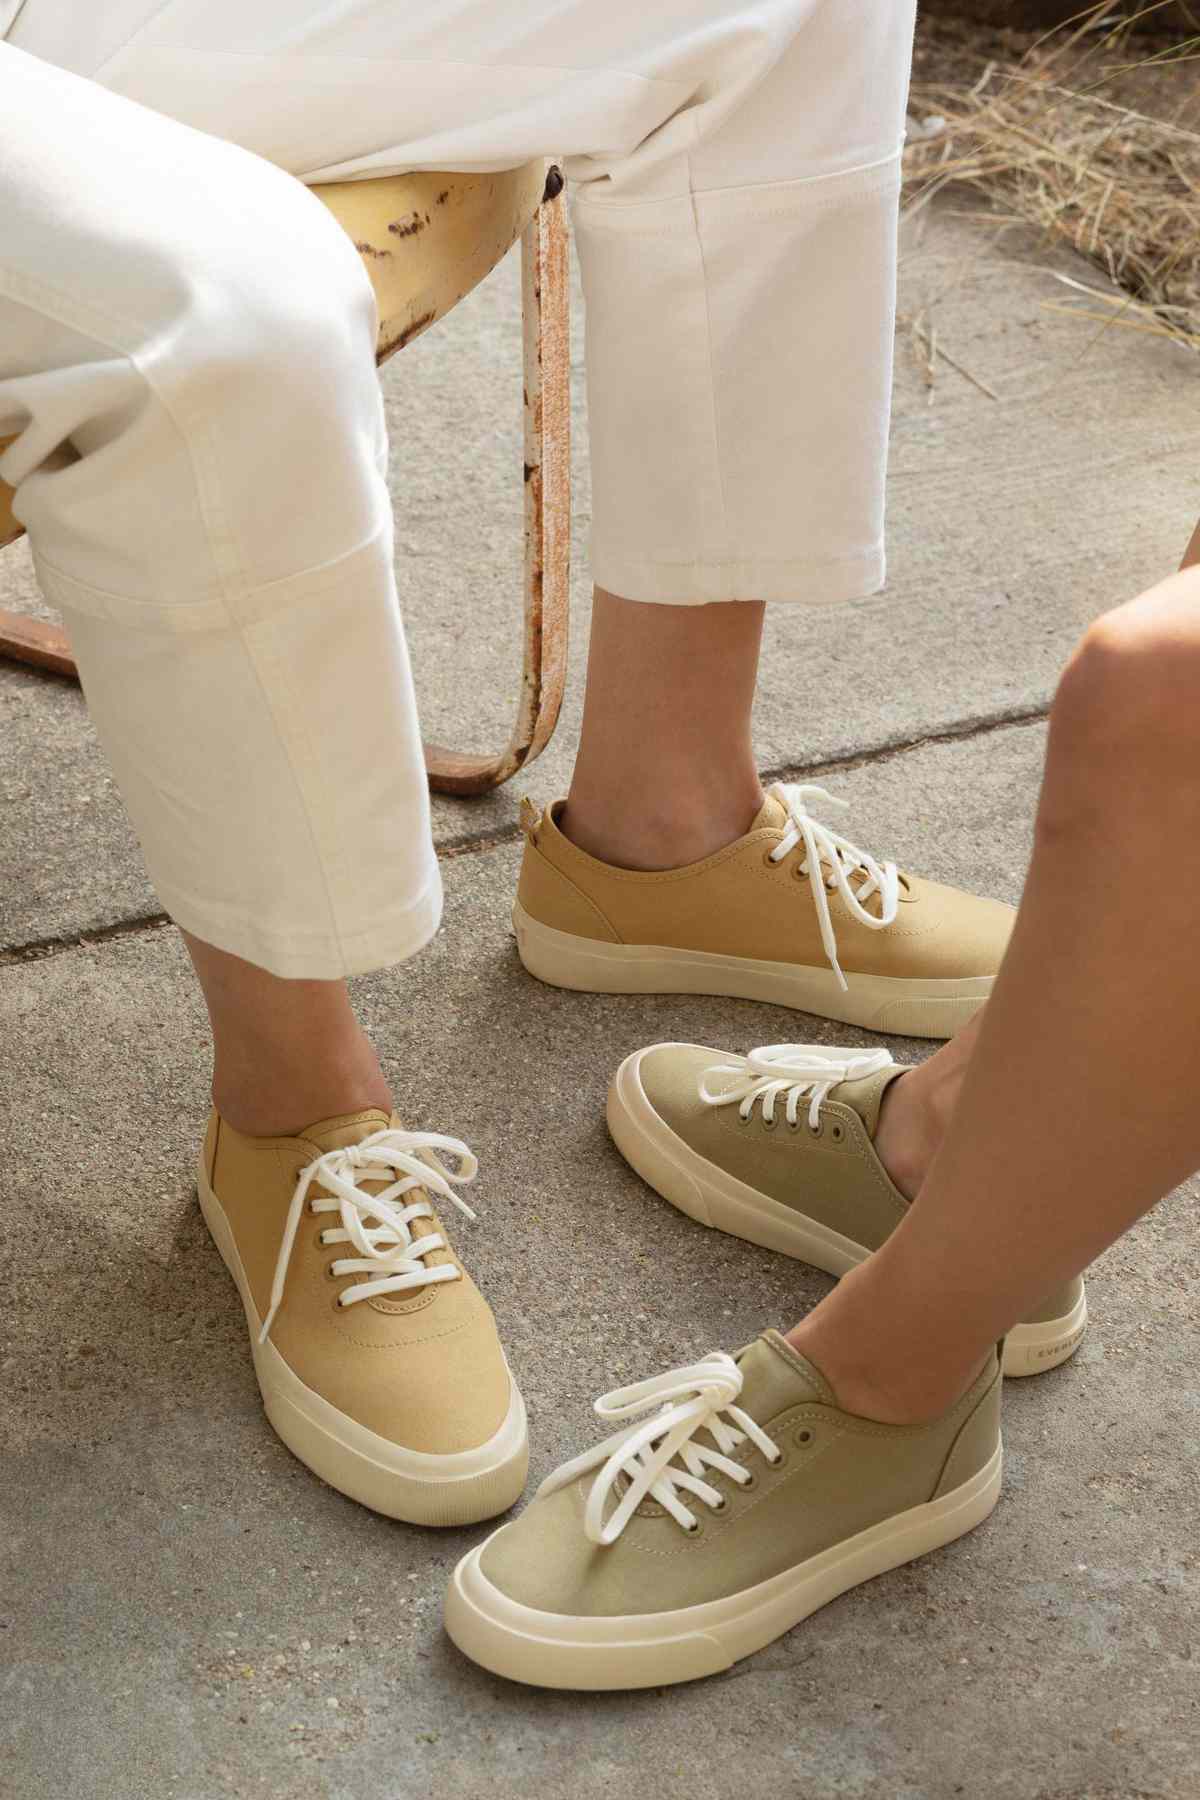 Everlane\u0026rsquo;s Forever Sneaker Is Its 